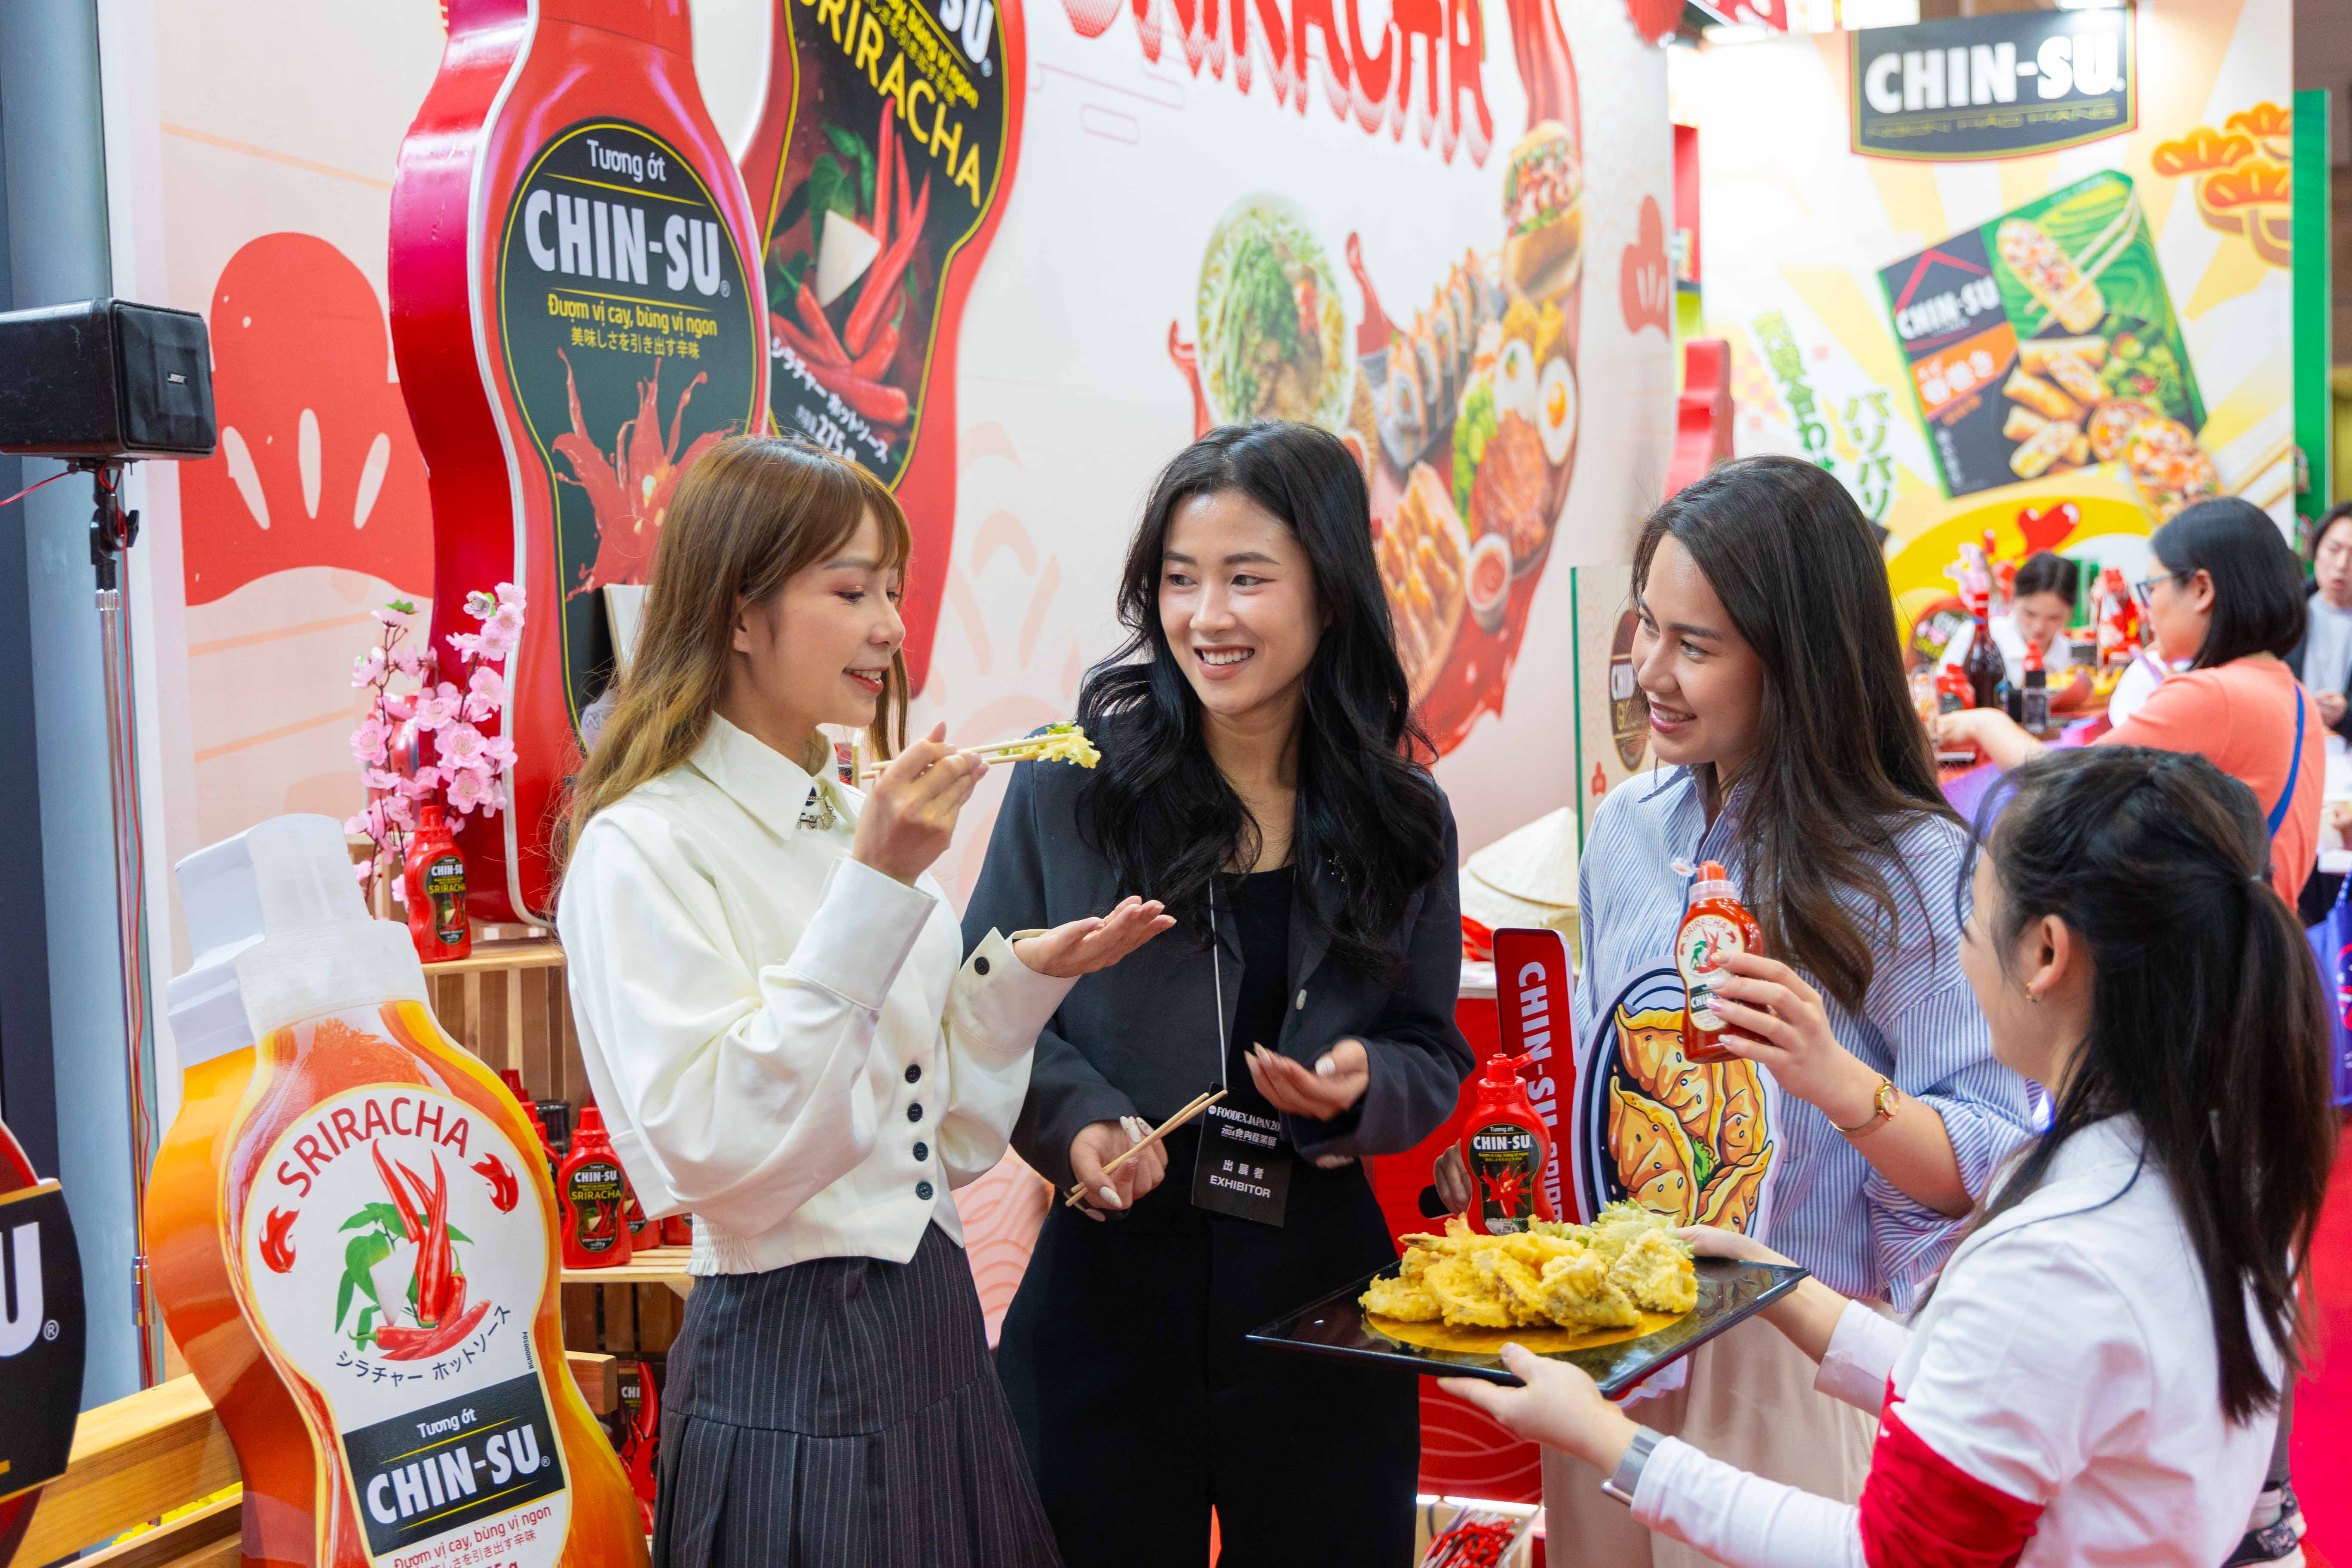 Japanese consumers eagerly embrace the new Chin-Su Sriracha chili sauce product.